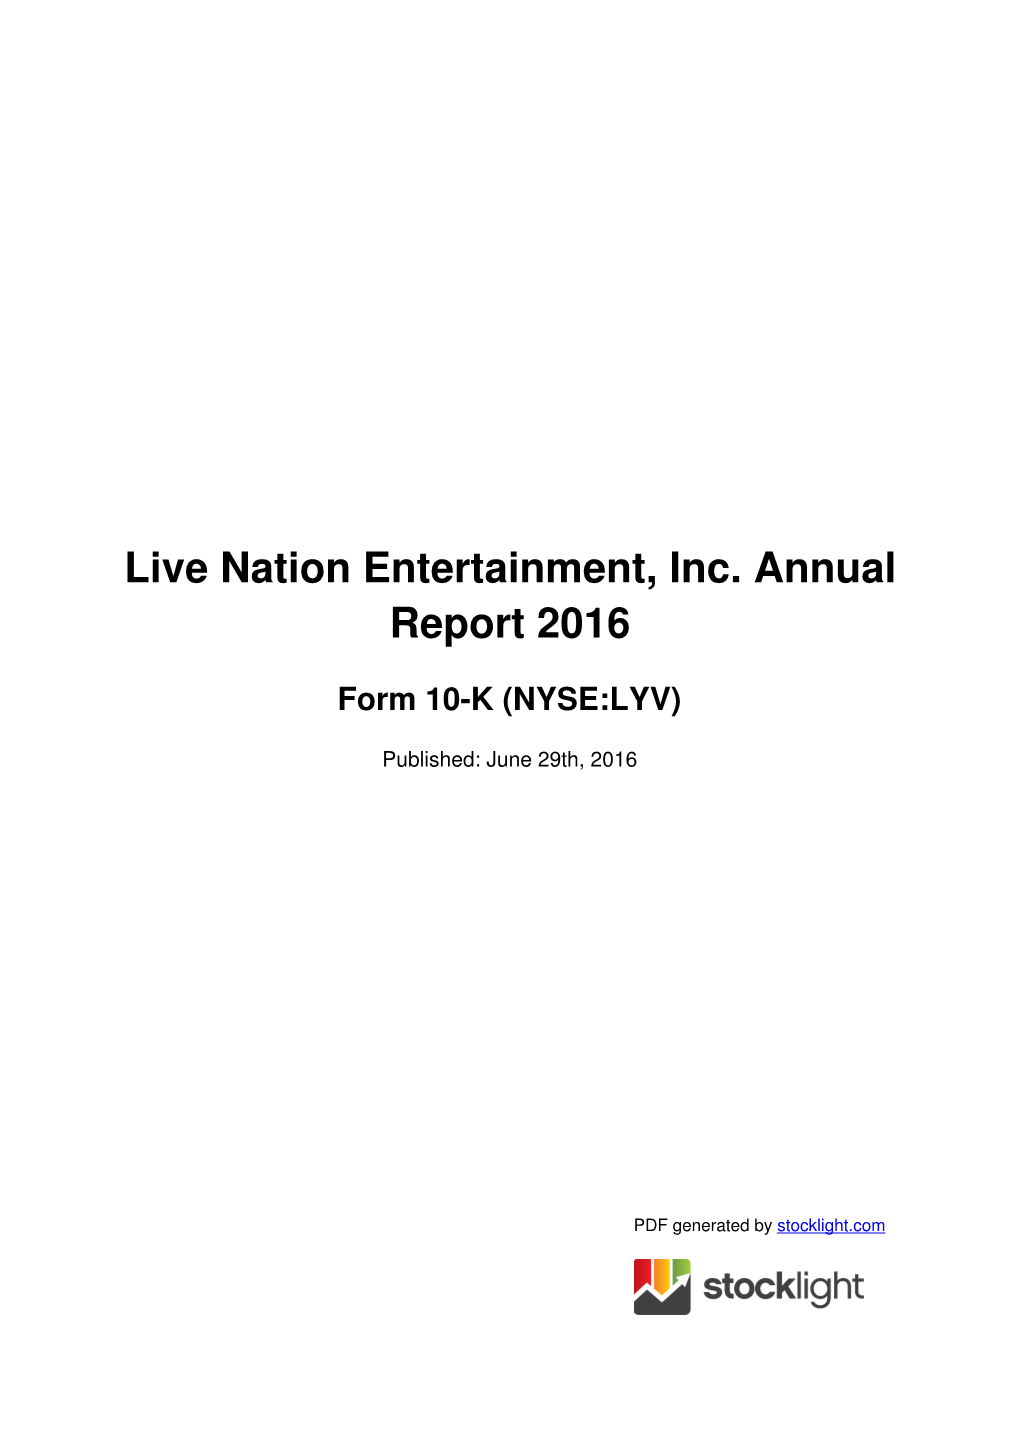 Live Nation Entertainment, Inc. Annual Report 2016